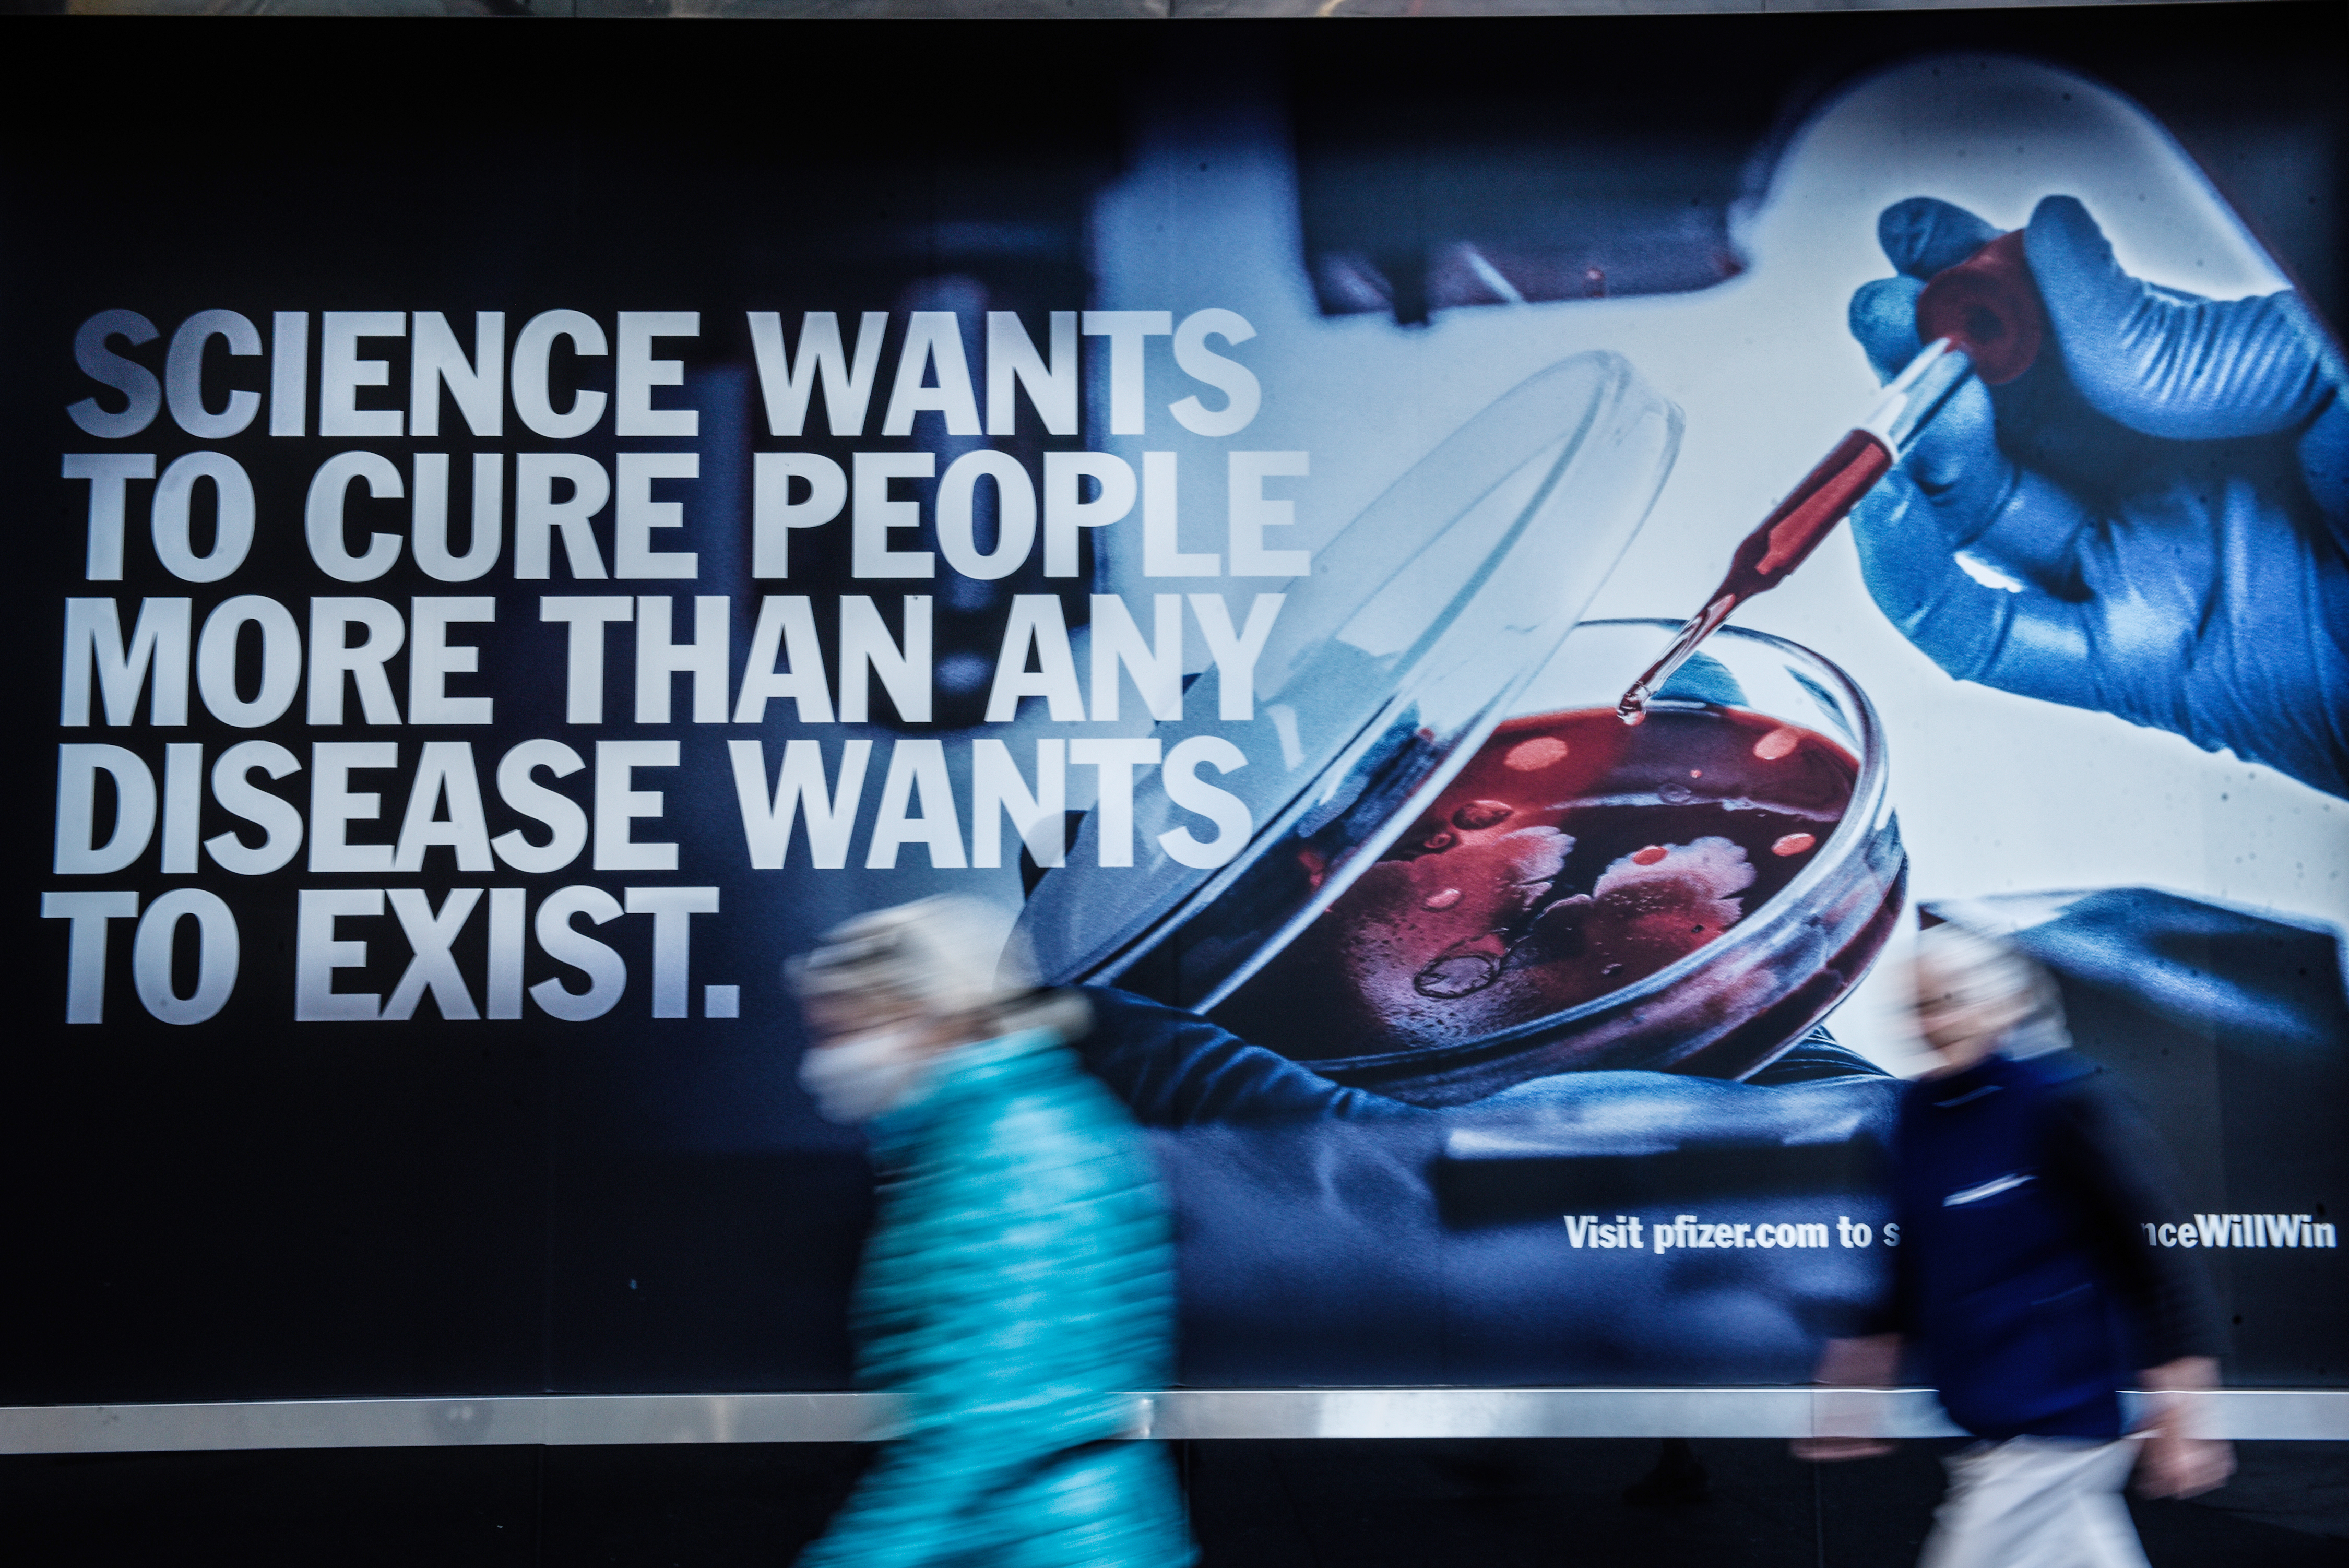 Pedestrians walk past a wall billboard that reads “Science wants to cure people more than any disease wants to exist.”